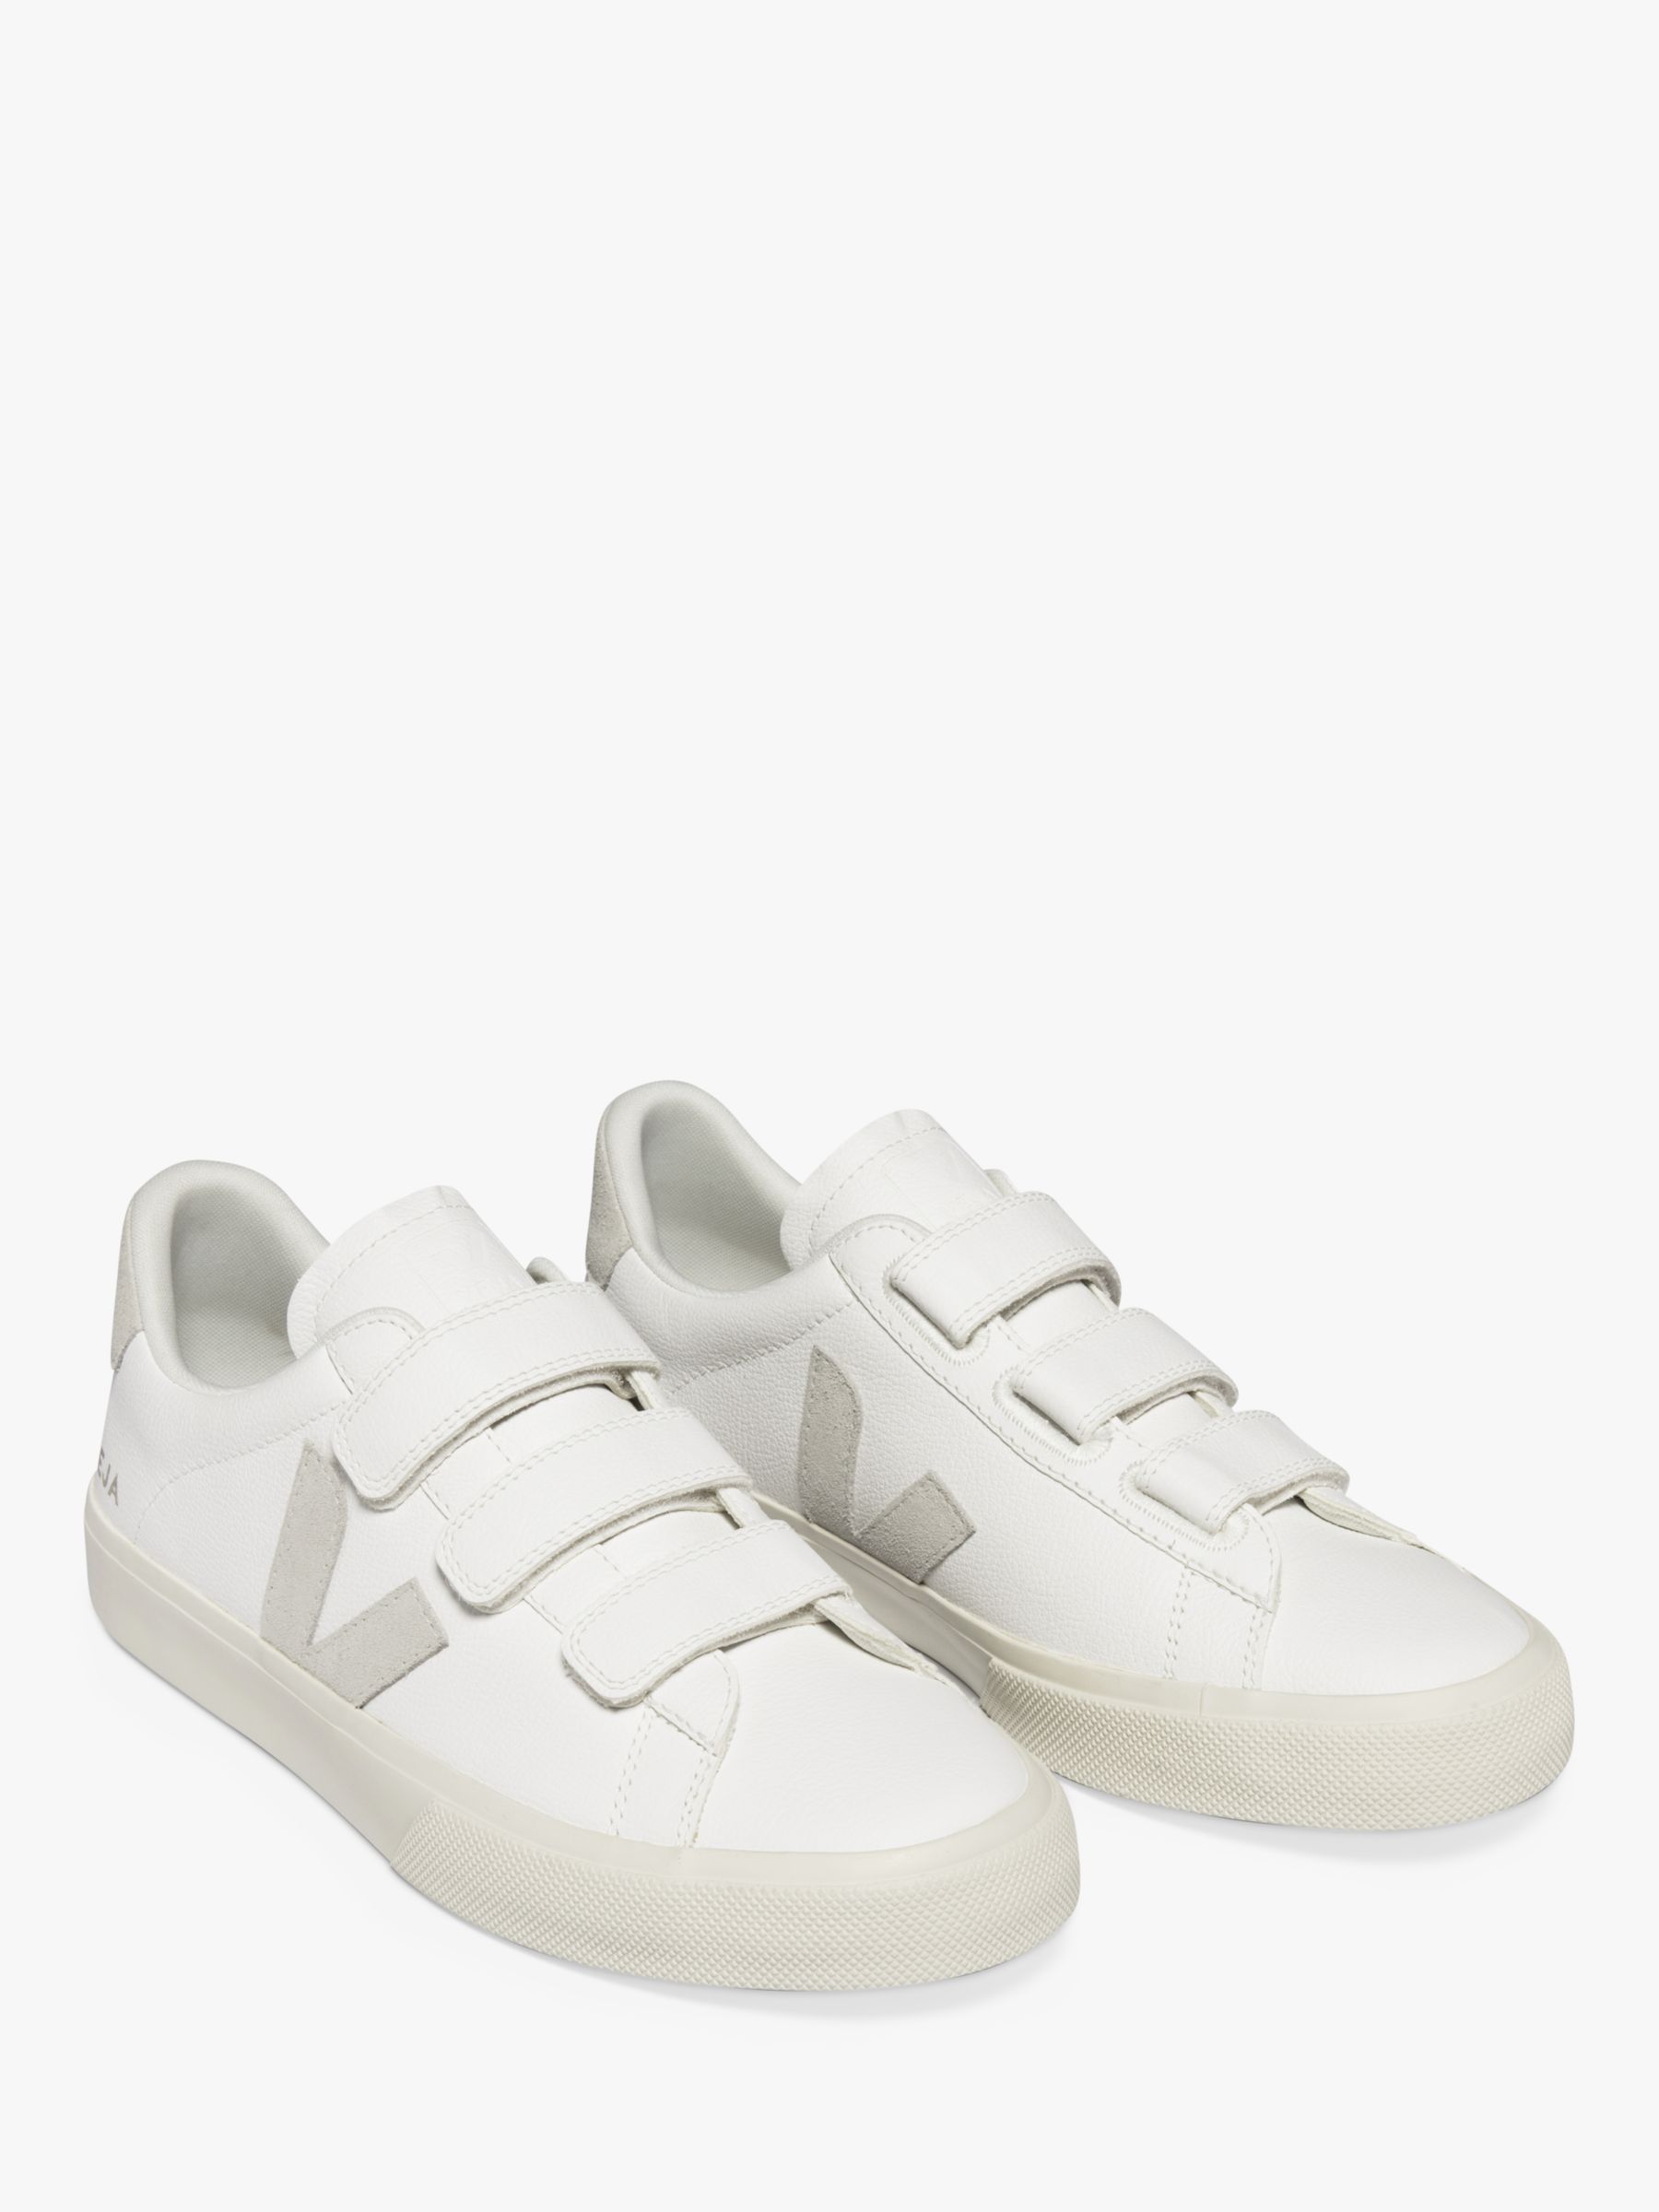 Buy VEJA Recife Leather Trainers, Extra White/Natural Online at johnlewis.com